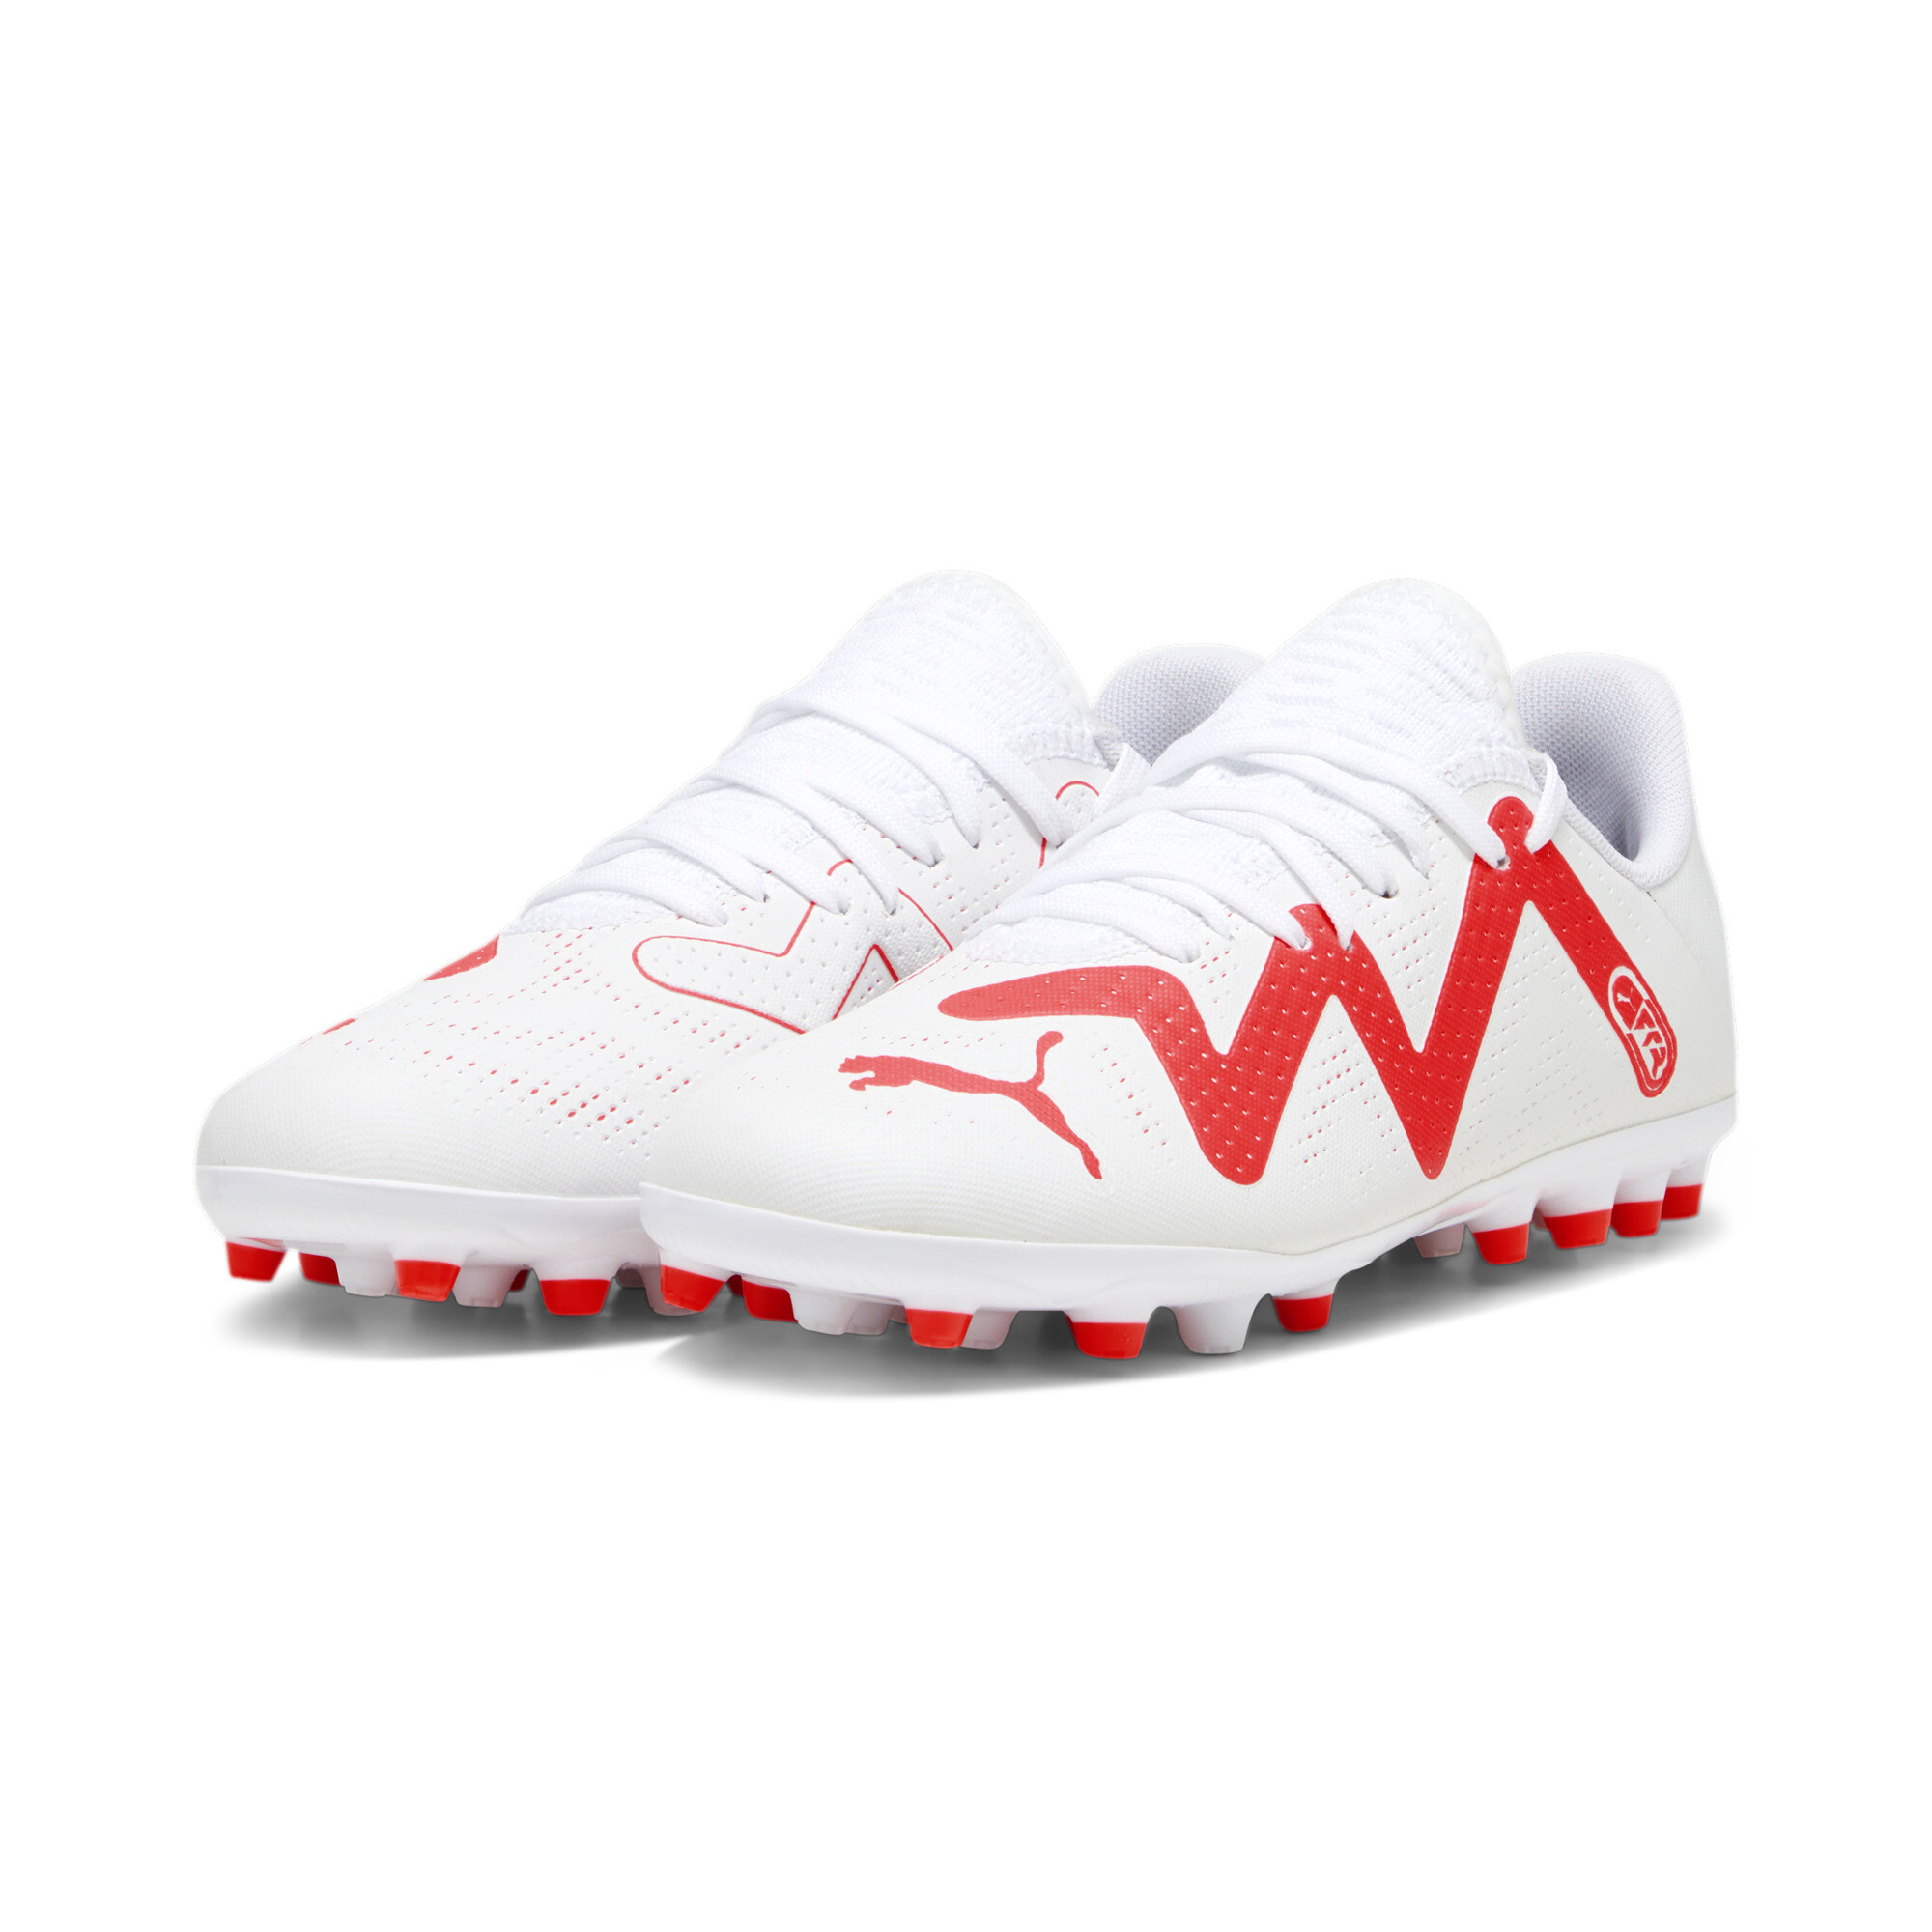 Puma FUTURE PLAY MG Youth Football Boots, White, Size 38, Shoes